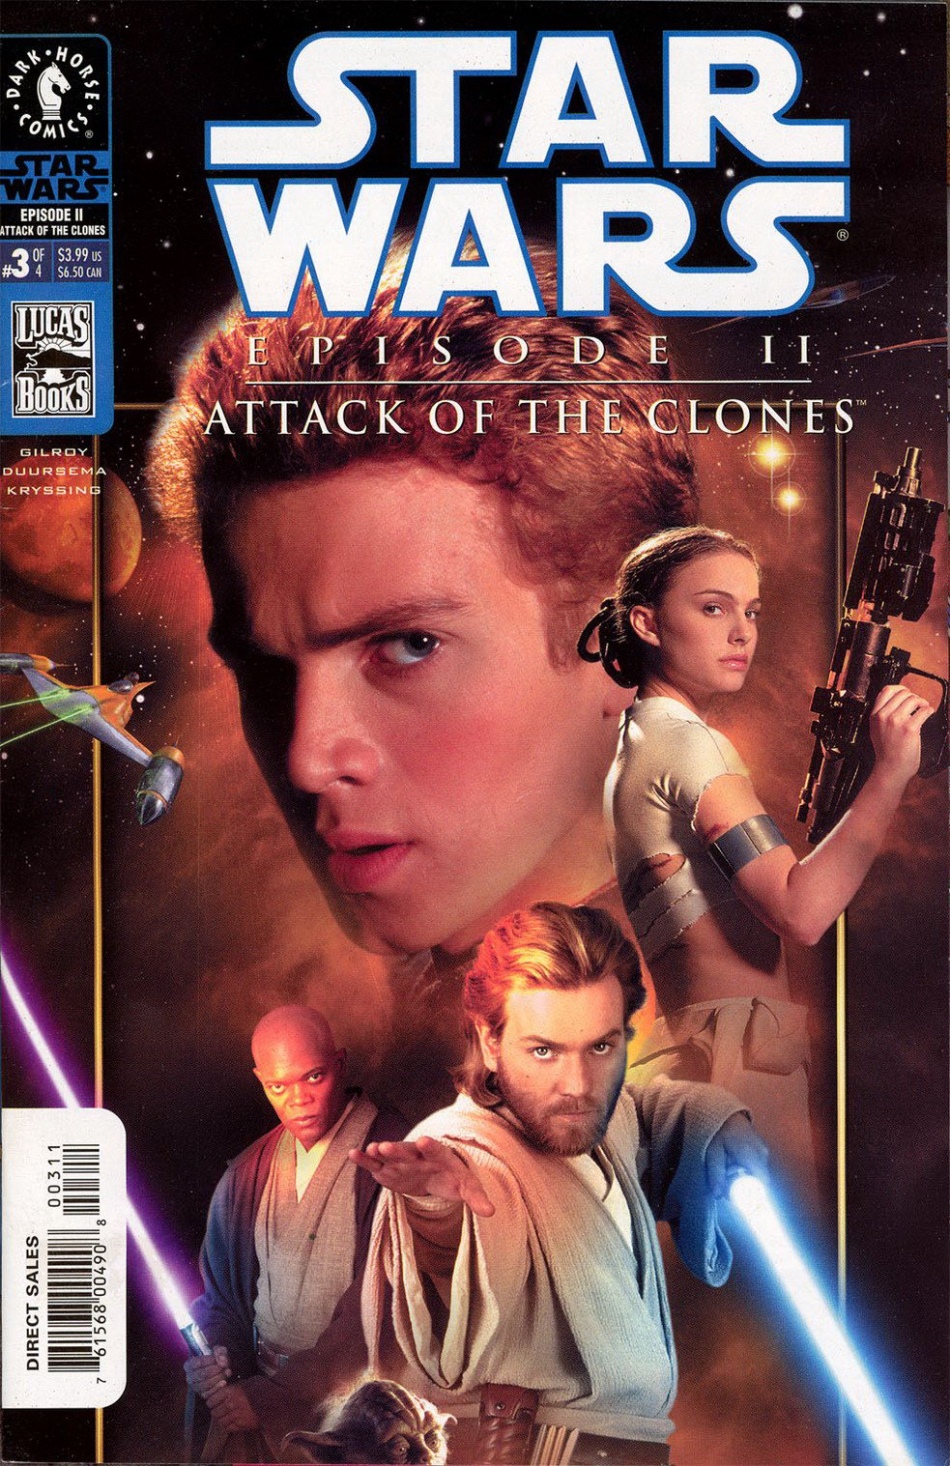 Episode II: Attack of the Clones #3 (Photo Cover) (01.05.2002)